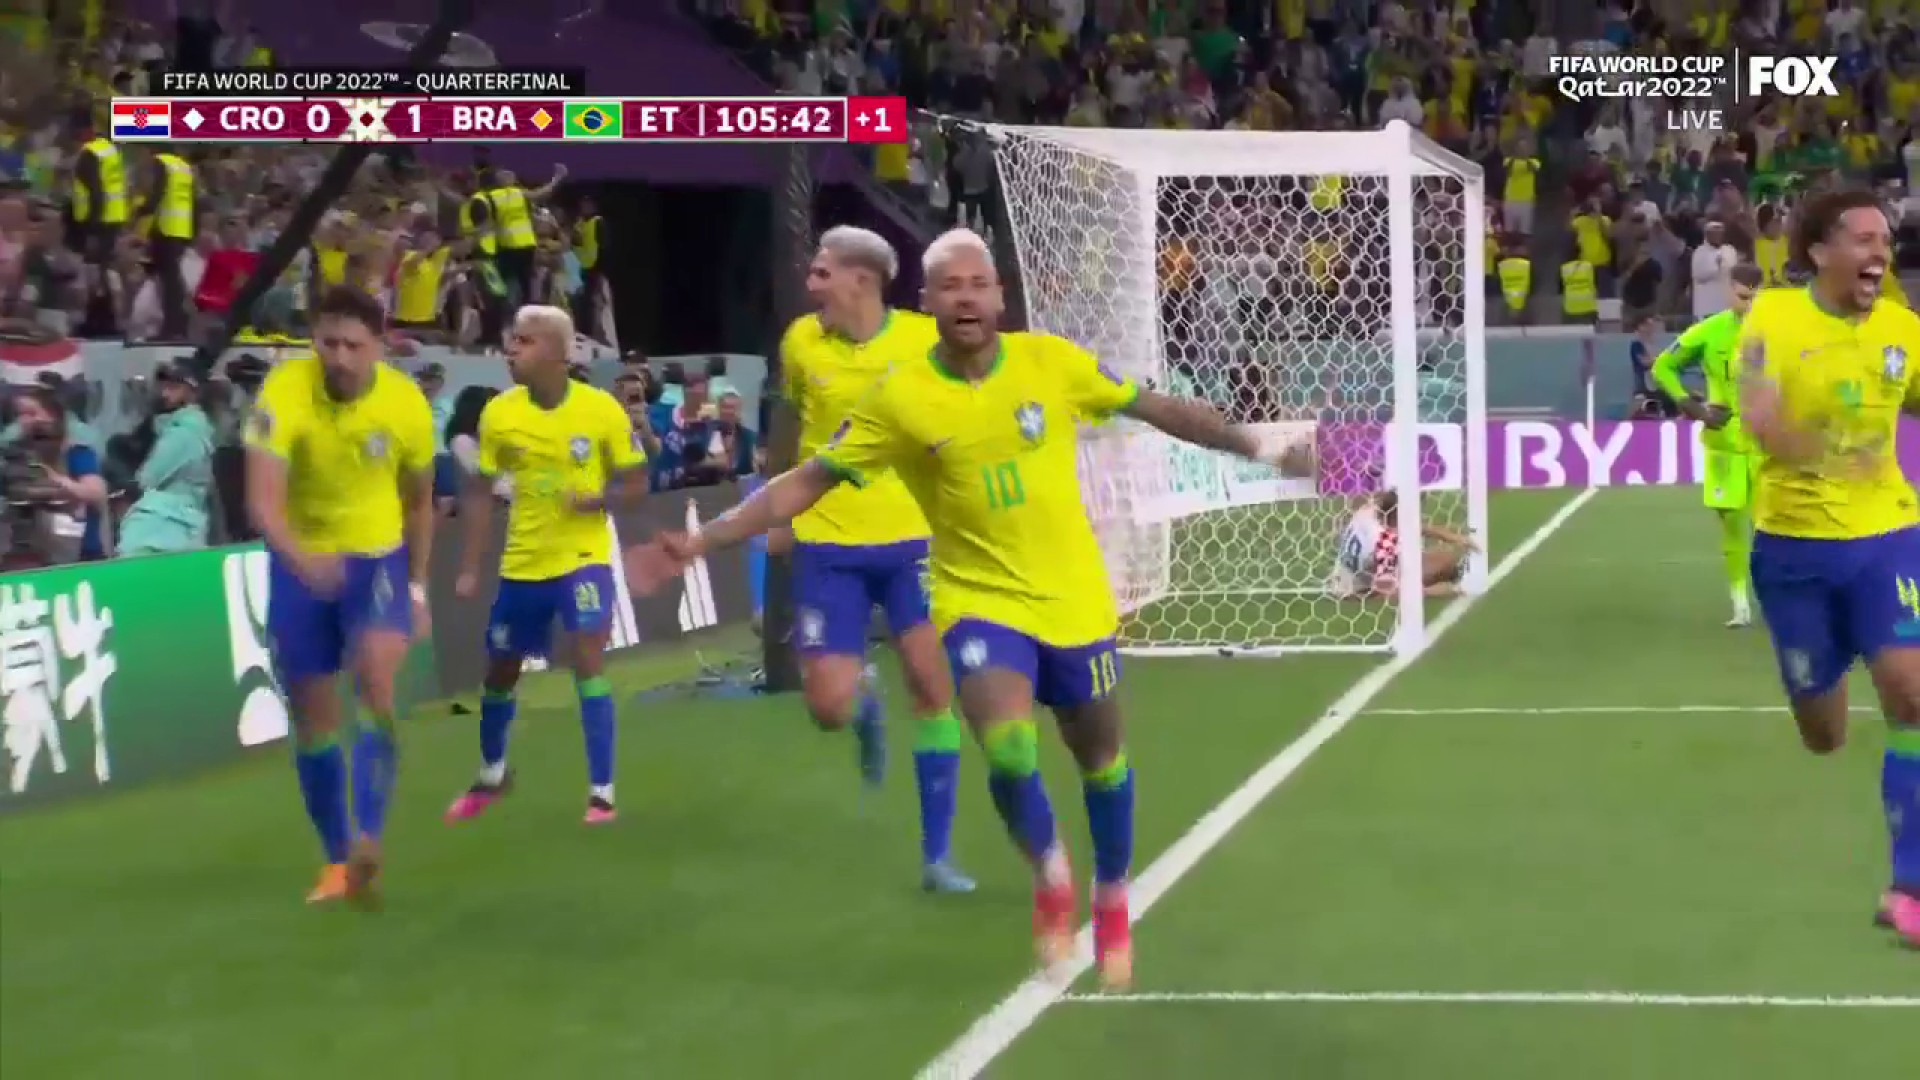 NEYMAR IN THE 106TH MINUTE 😱😱😱

BRAZIL TAKES THE LEAD 🇧🇷”